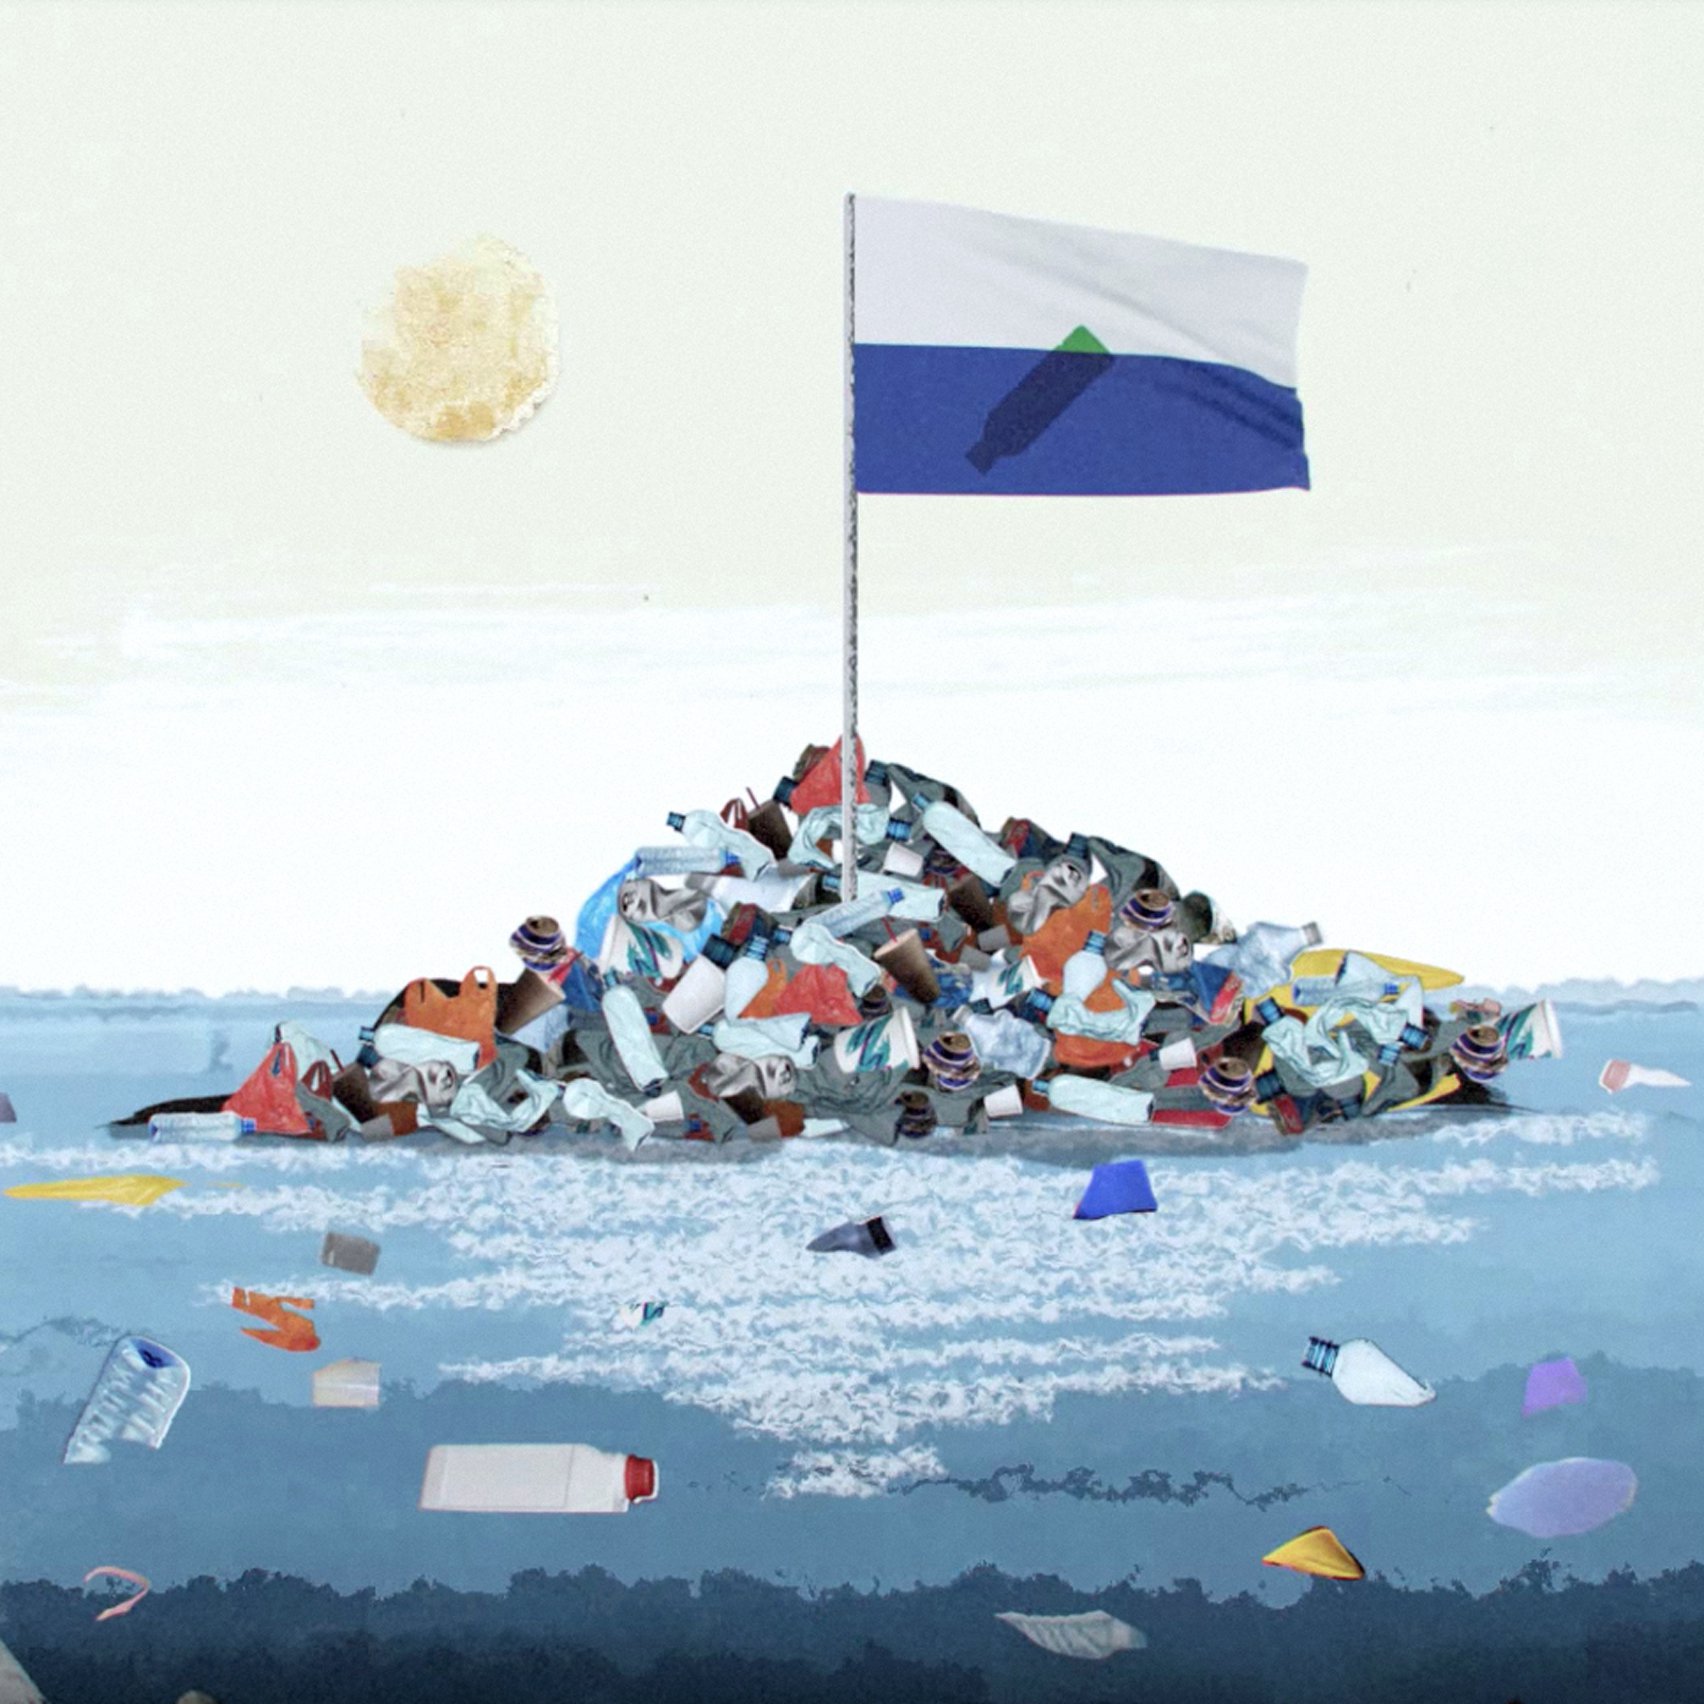 Ad Creatives Prose Turning Growing Pile of Ocean Trash Into Country